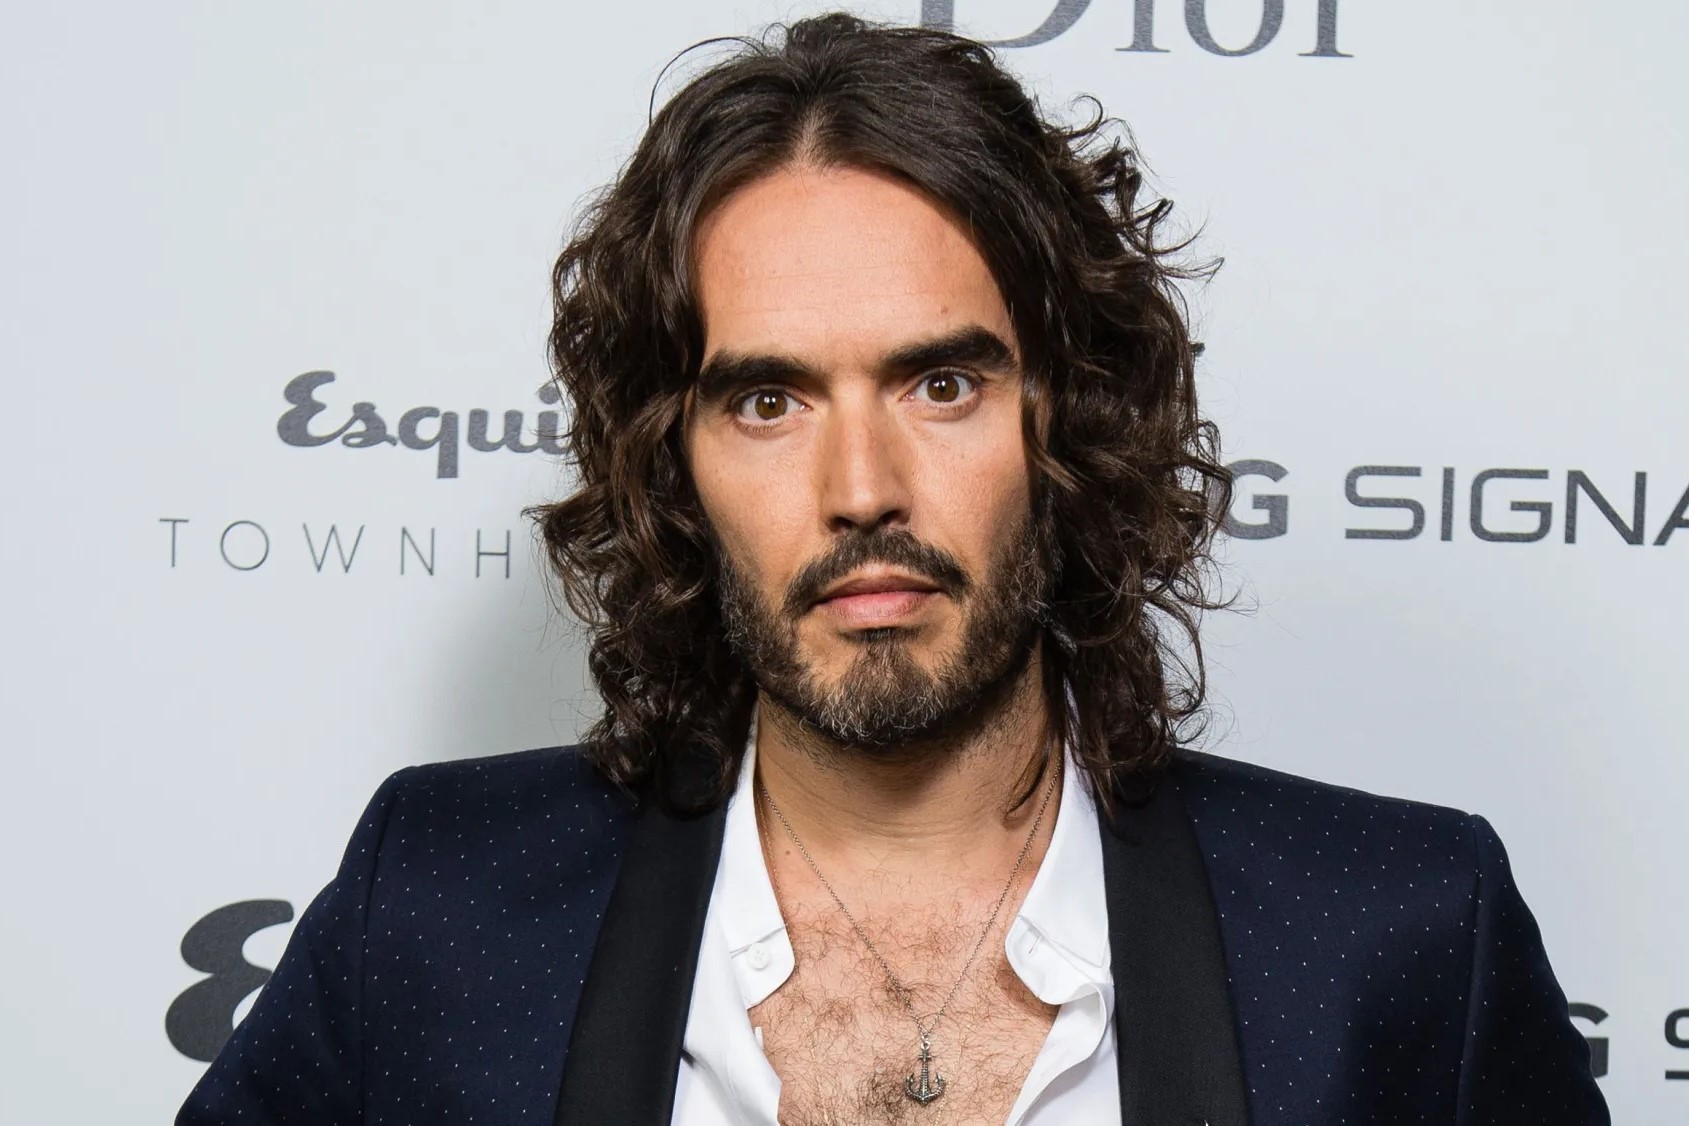 Russell Brand’s Mind-Blowing IQ Revealed!